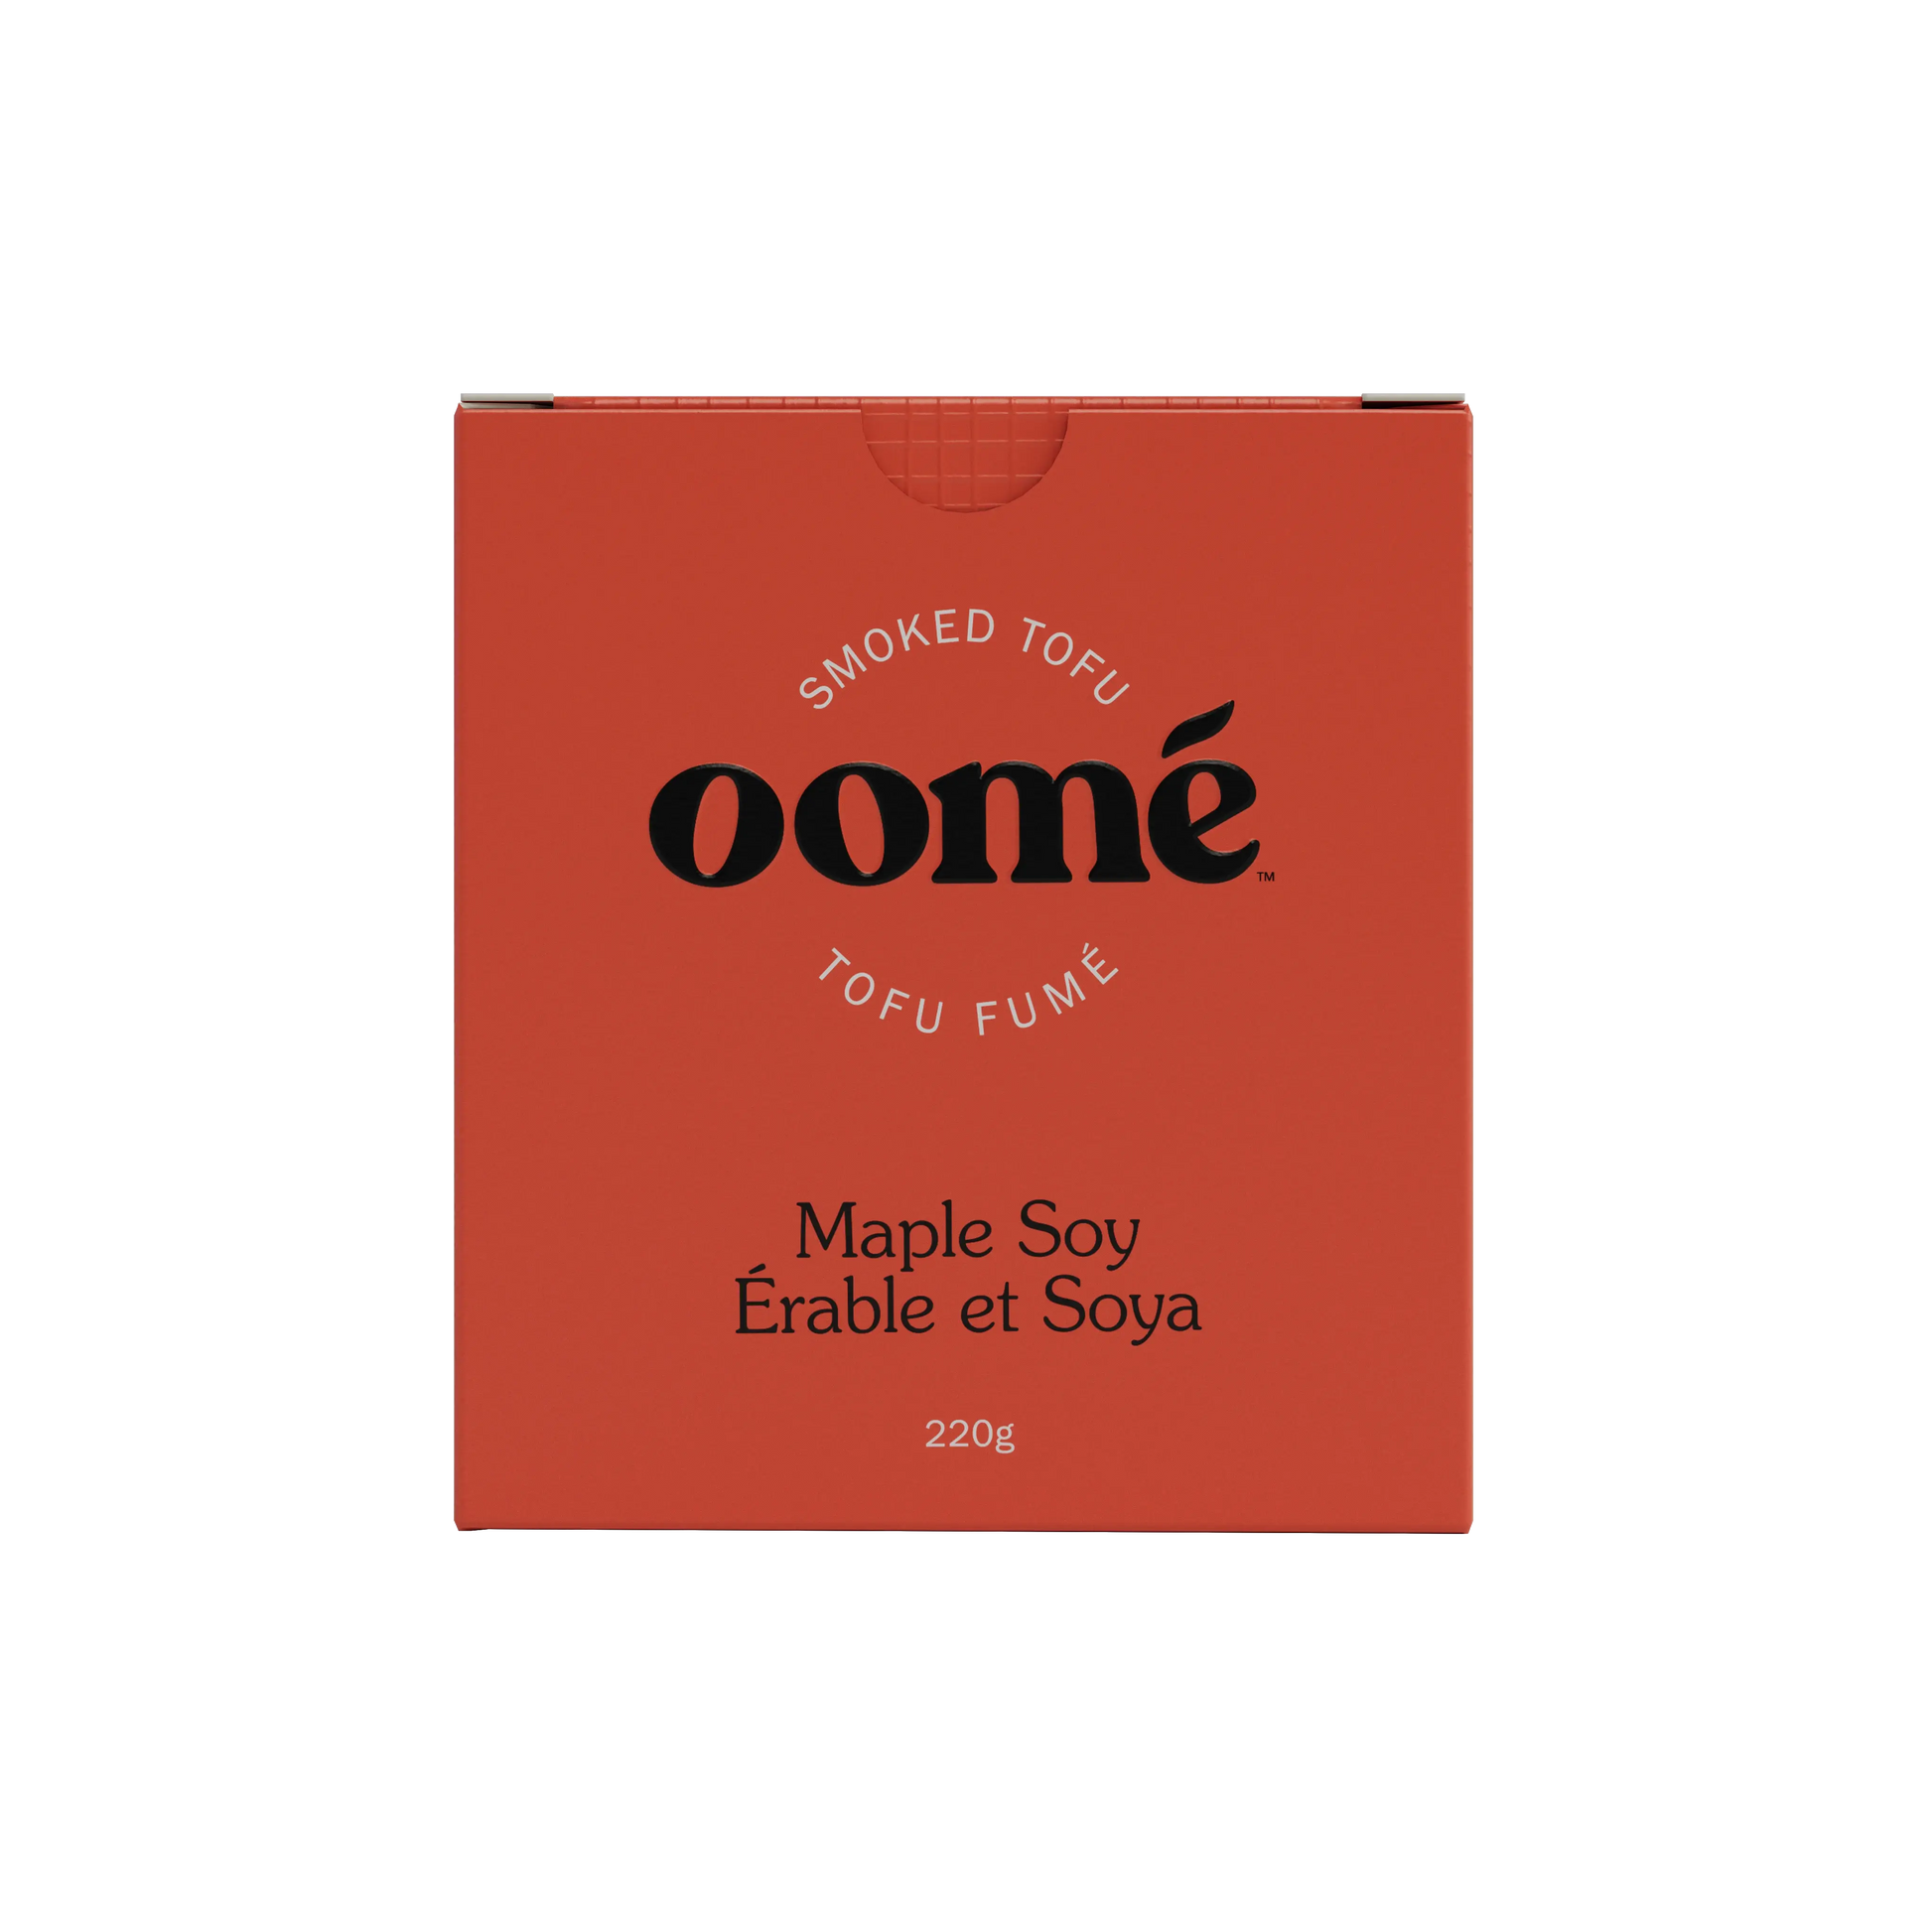 oome smoked tofu maple soy packaging front of pack